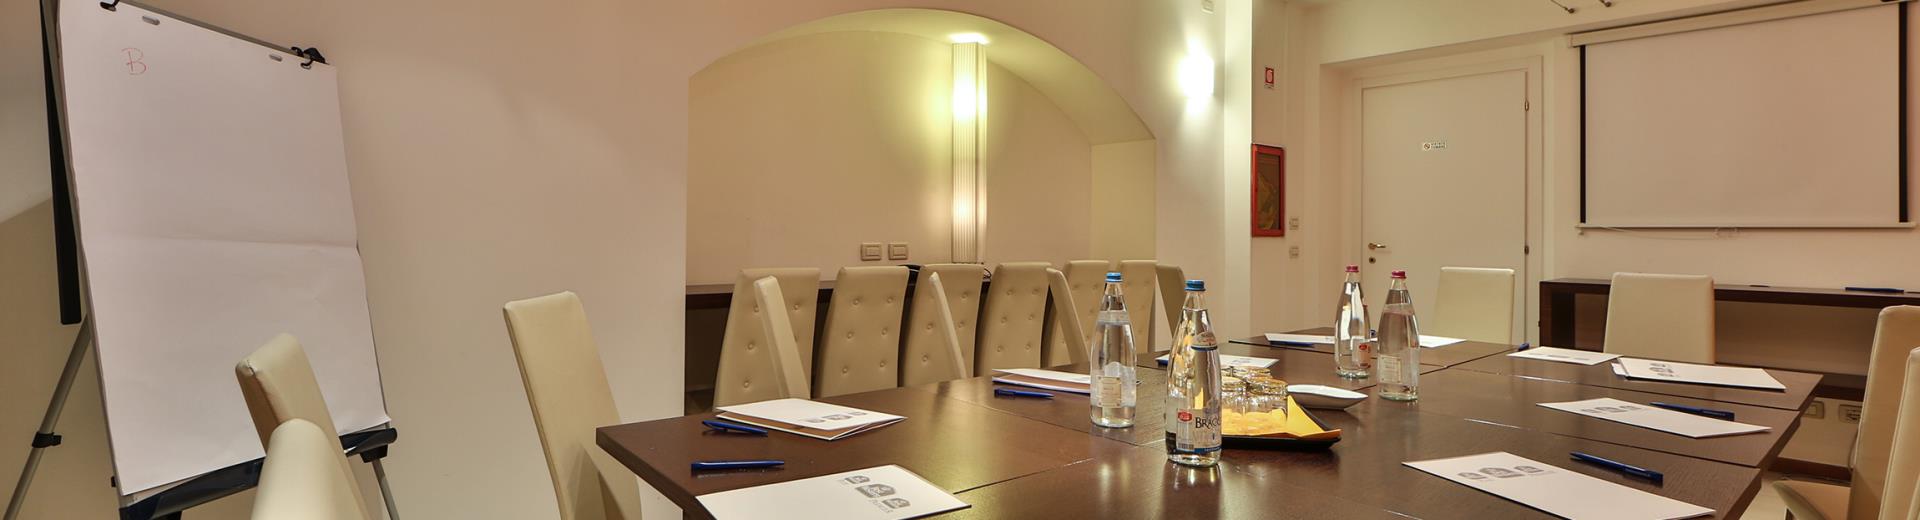 Plan your meeting in Bergamo with Best Western Hotel Piemontese, 4 star hotel in a central location.